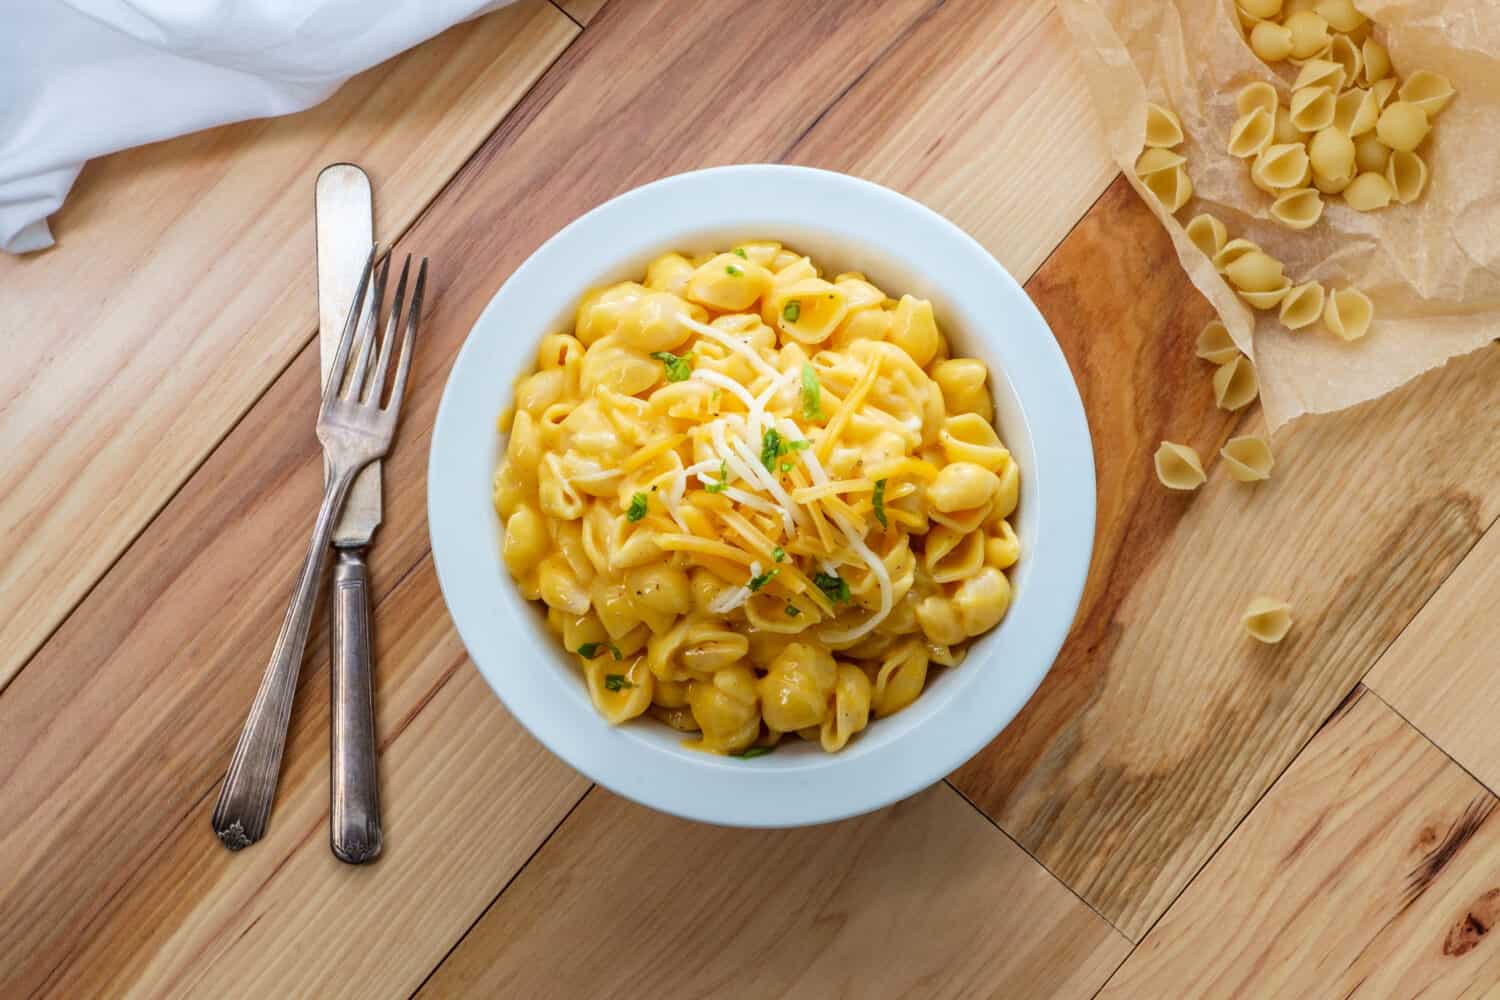 Delicious macaroni and cheddar cheese shell noodles in a bowl